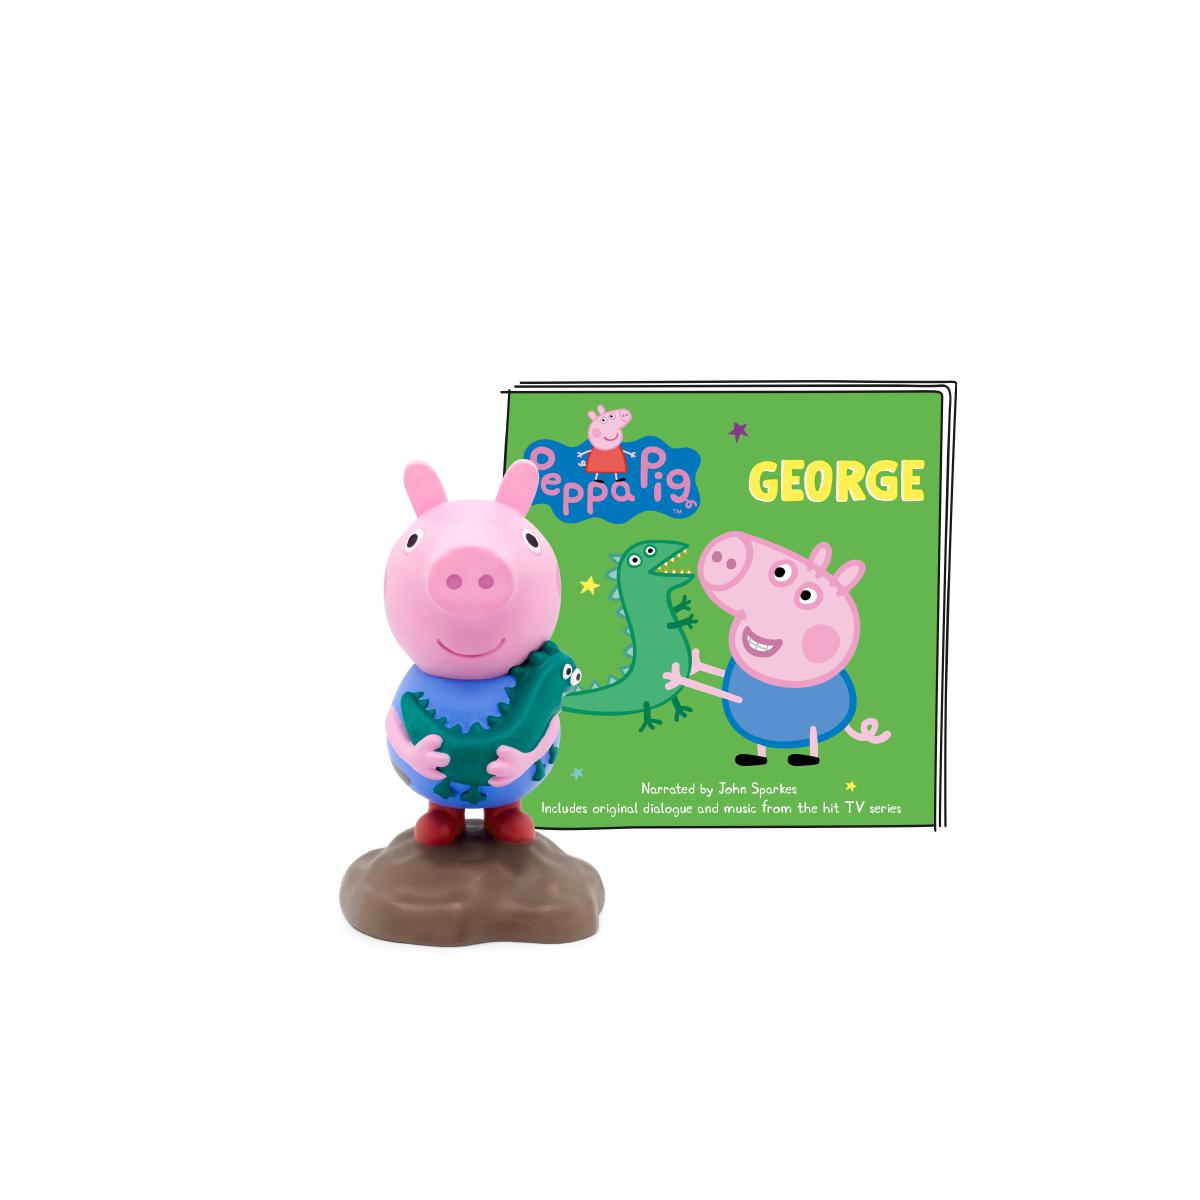 Tonies George Pig - Audio Character for use with Toniebox Player